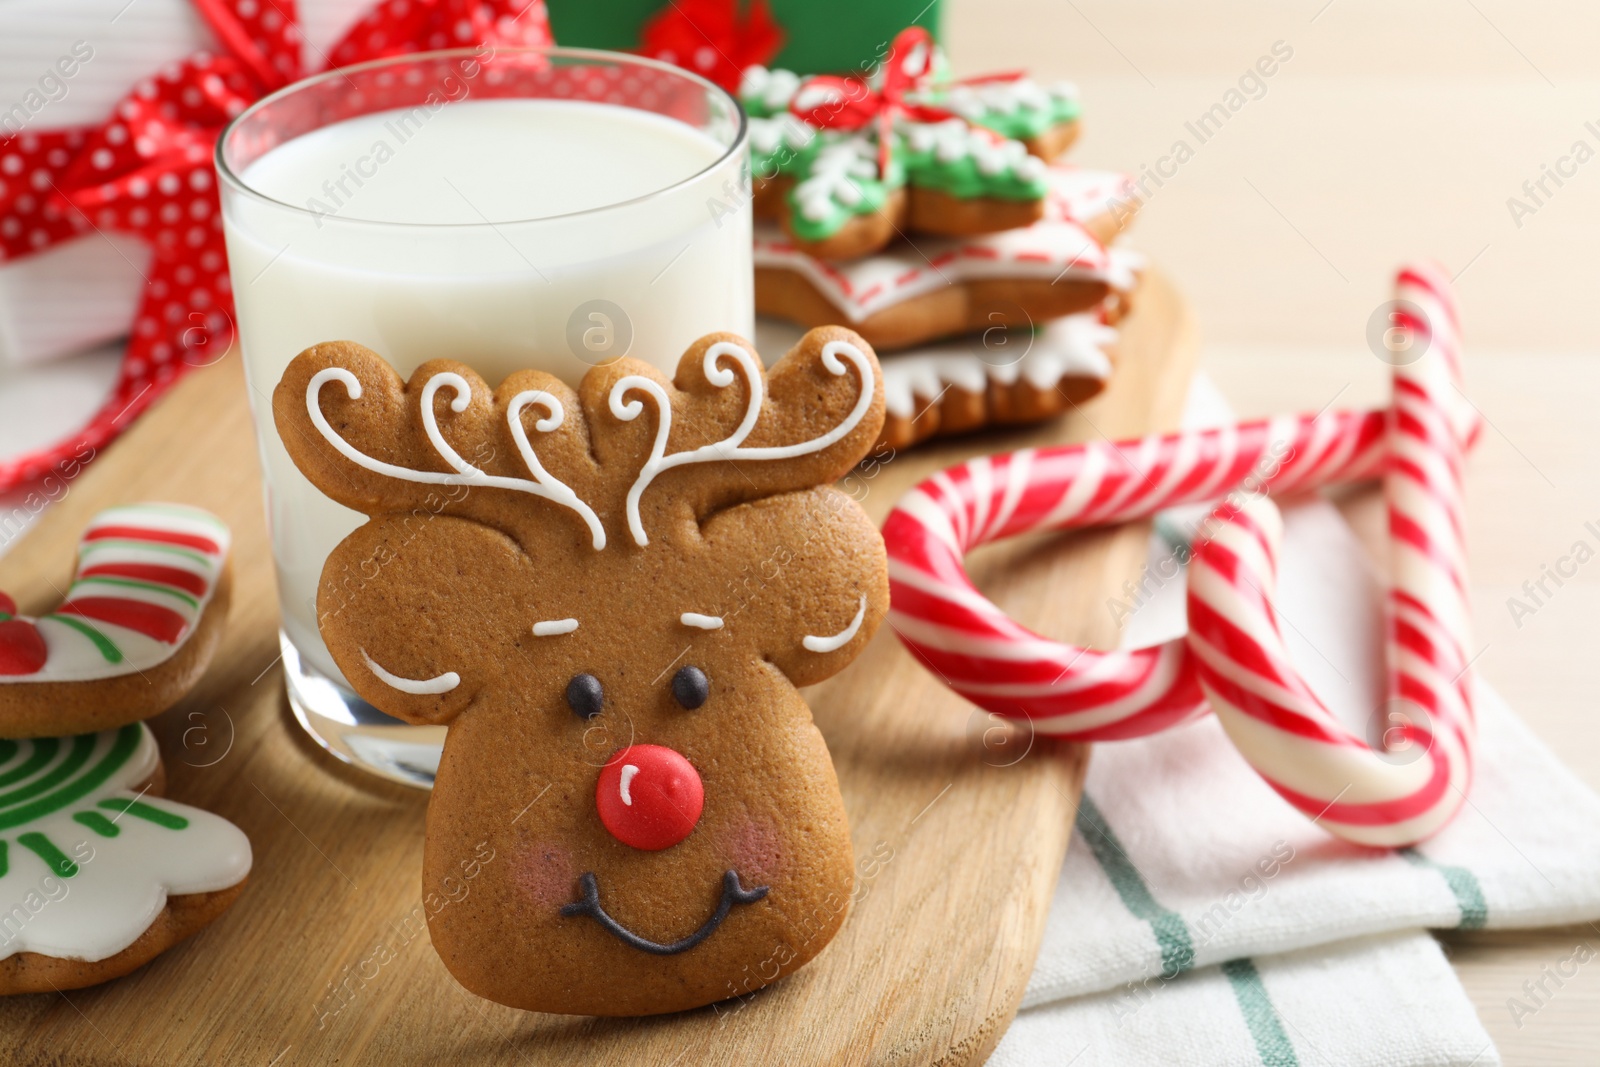 Photo of Decorated Christmas cookies and glass of milk on wooden table, closeup